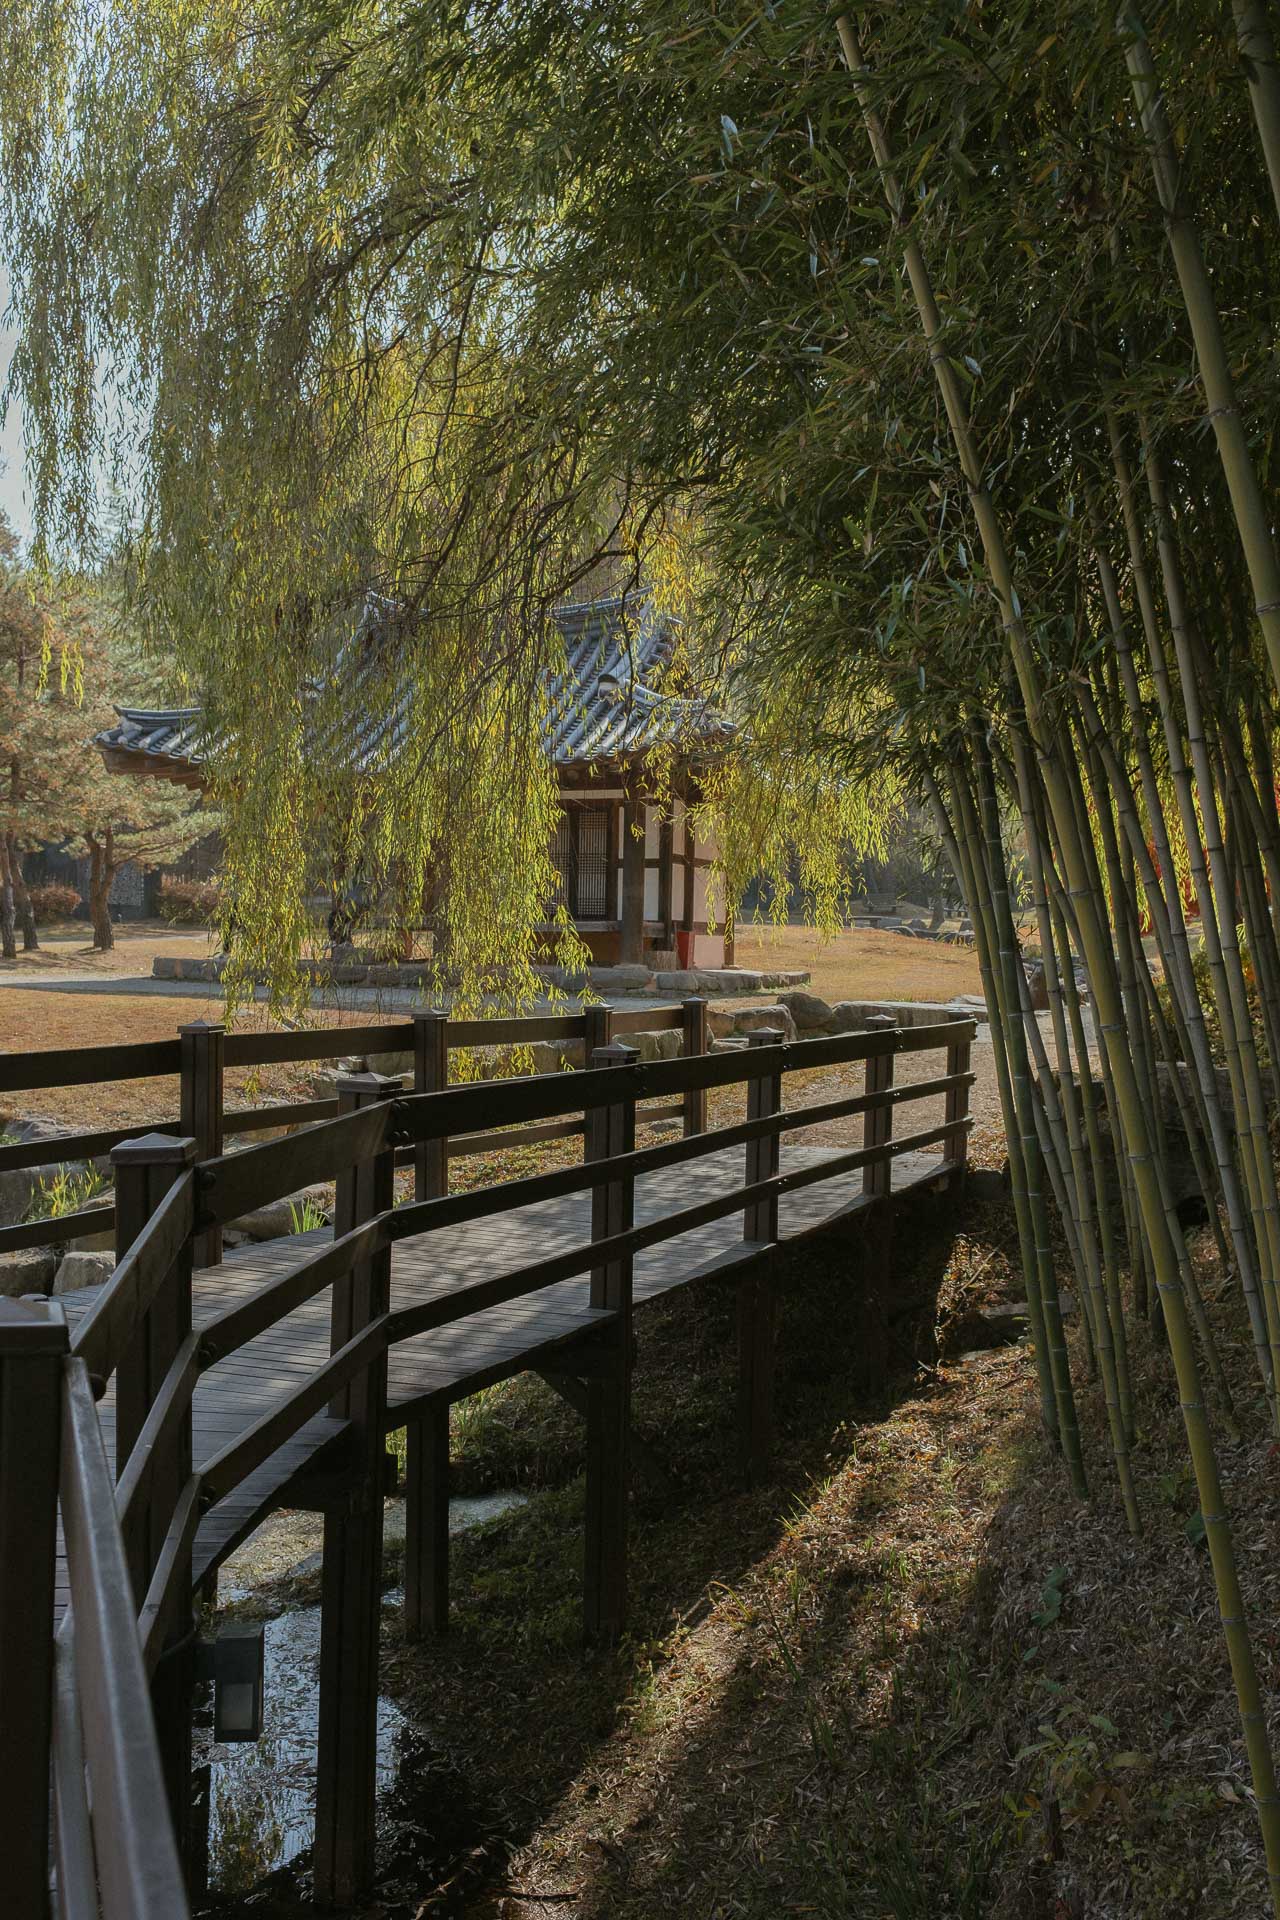 Juknokwon bamboo forest 5